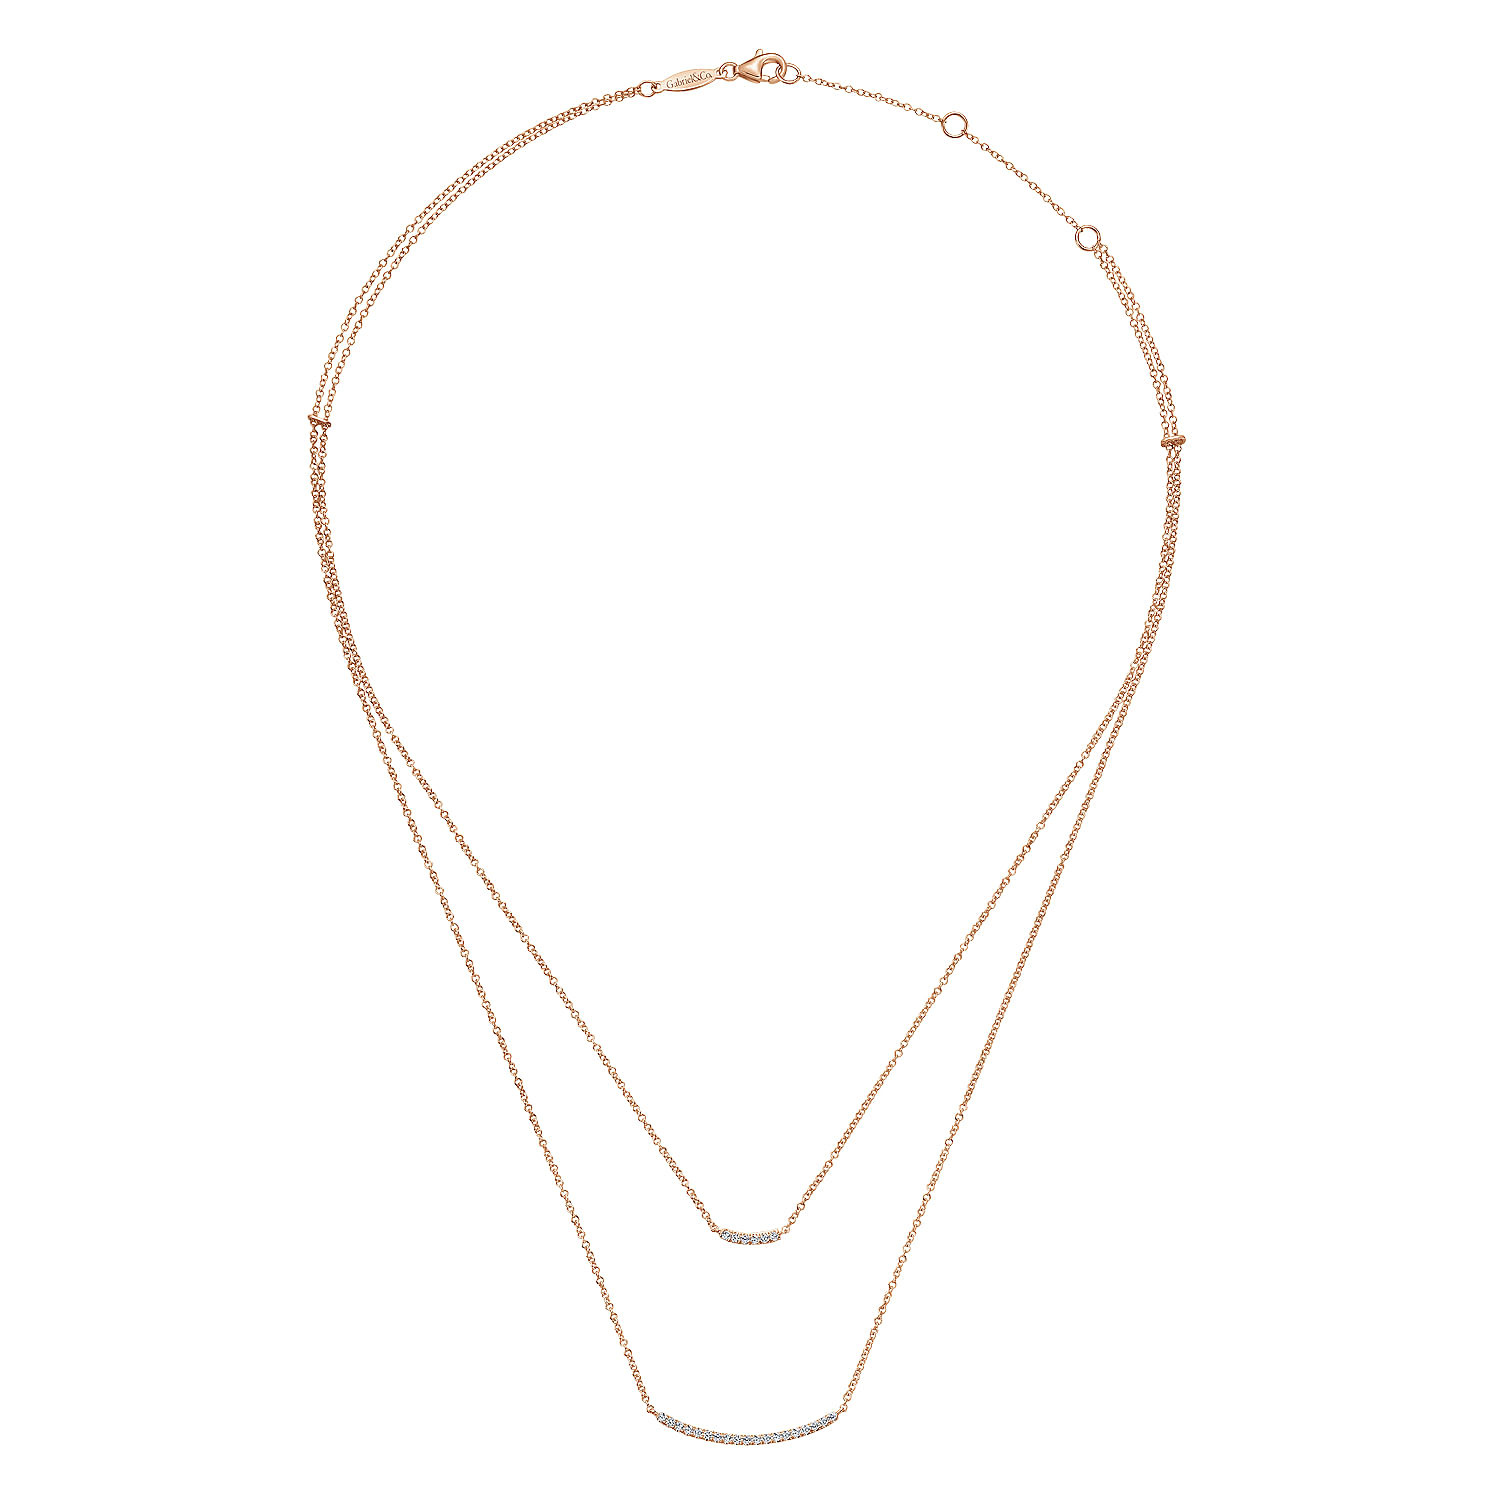 Two Strand 14K Rose Gold Curved Diamond Bar Necklace